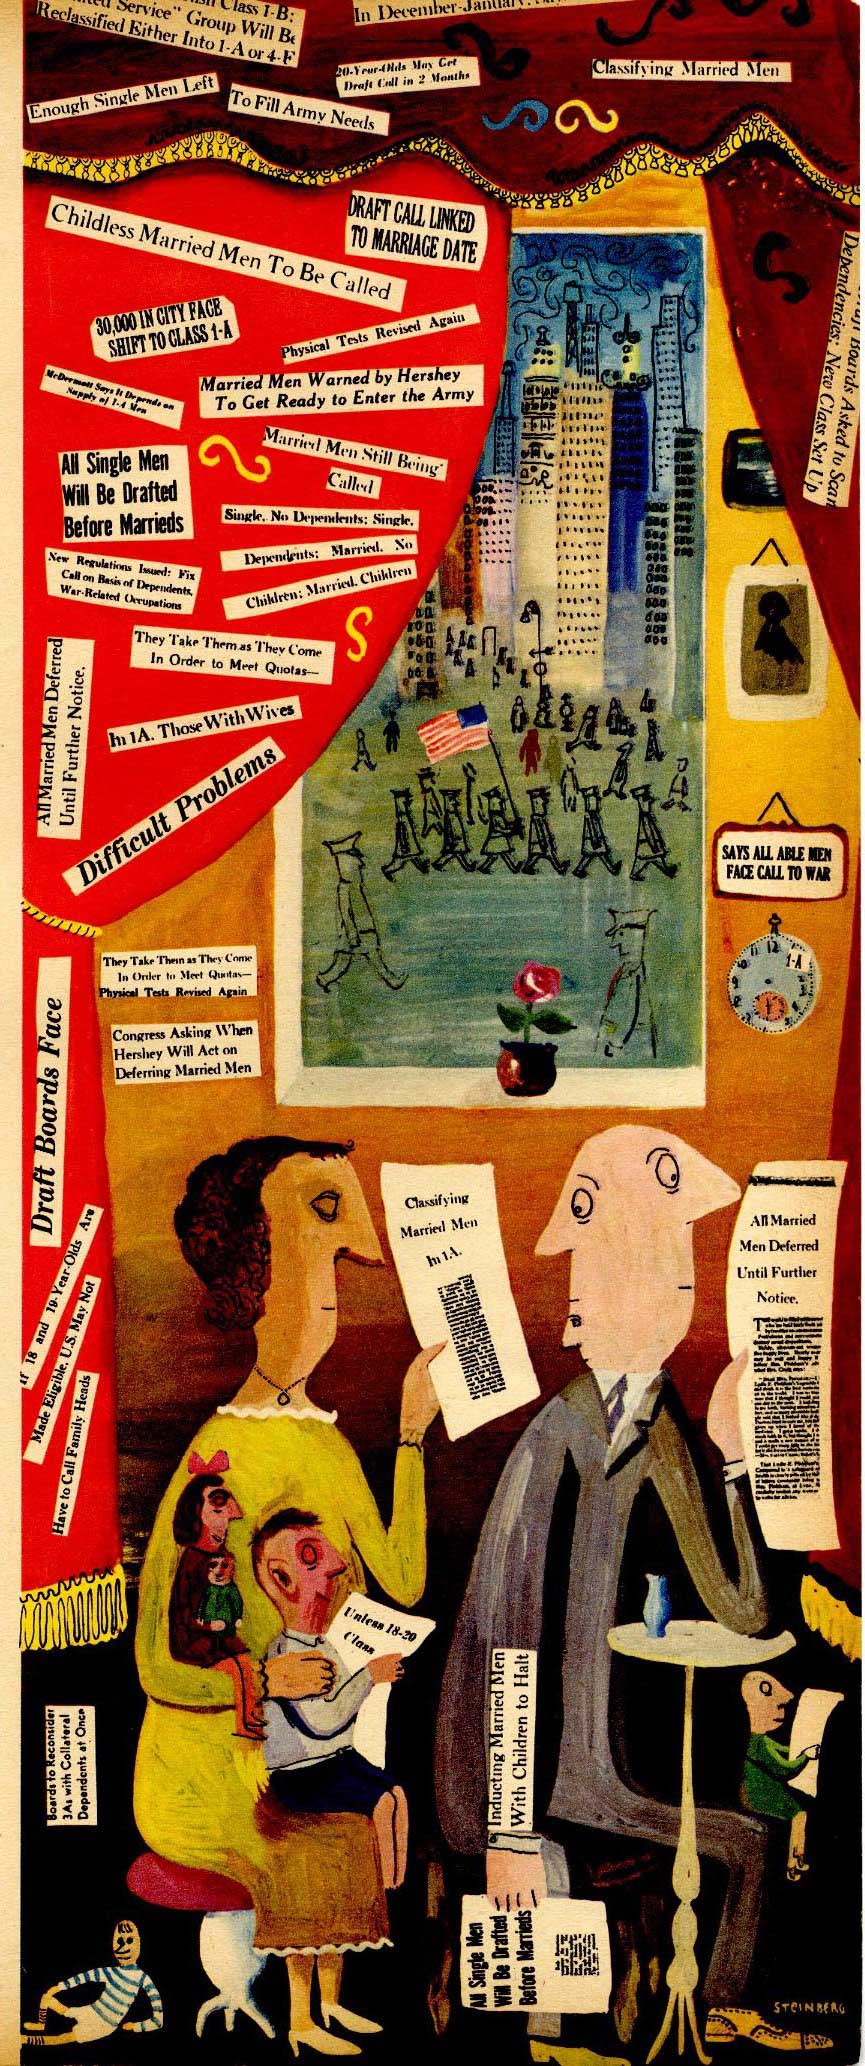 Painting and collage accompanying article “Who’ll Be Drafted When?” <em>Fortune</em>, November 1942.